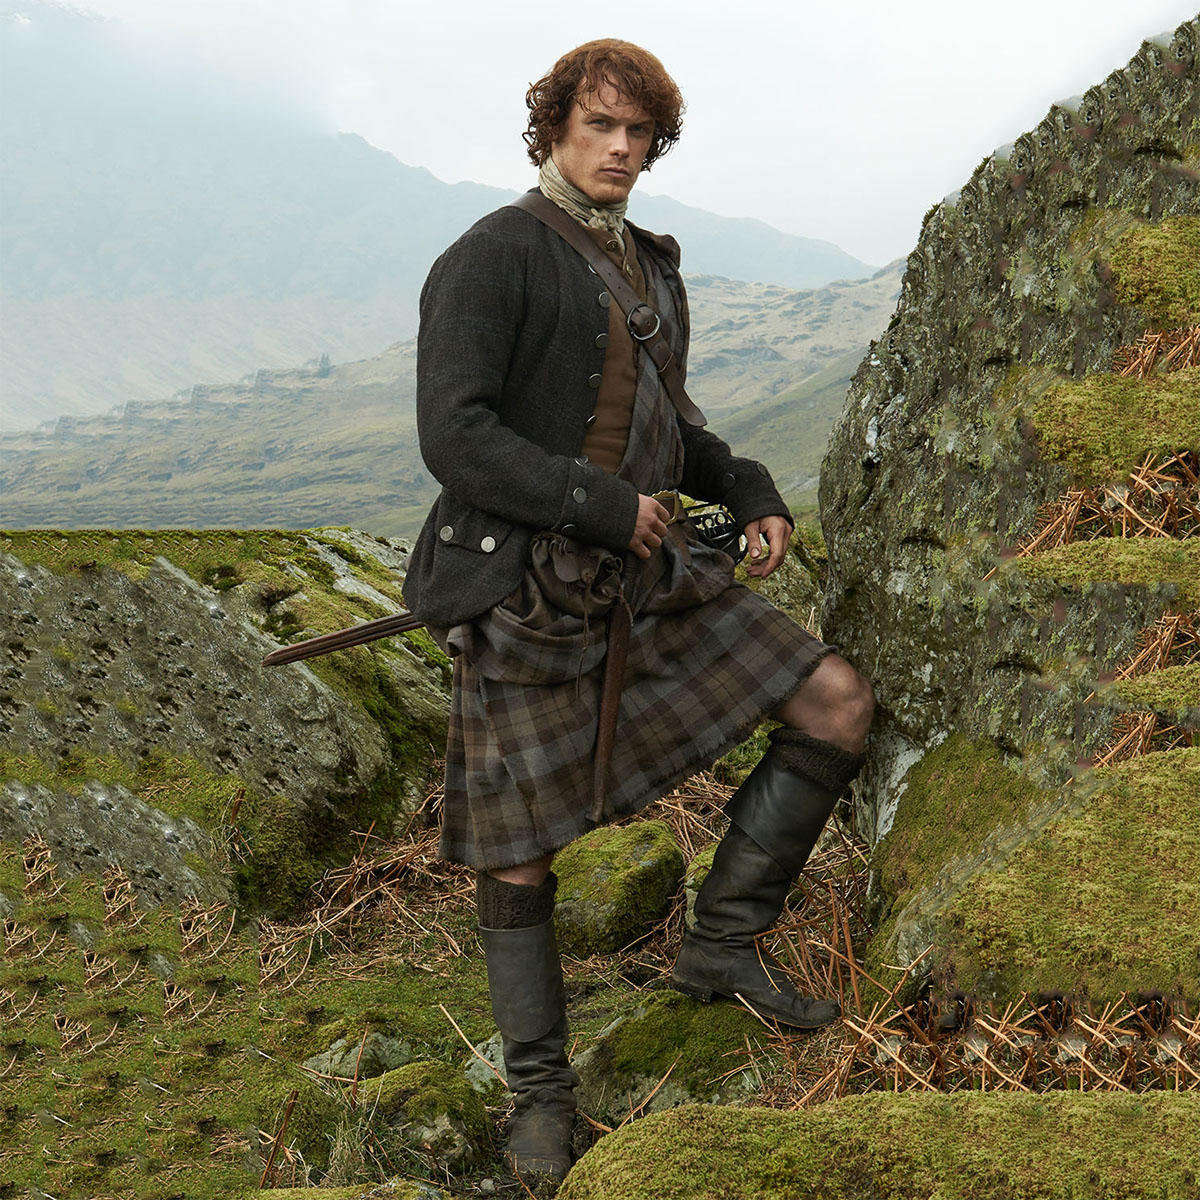 A man in a kilt standing on a grassy hill.